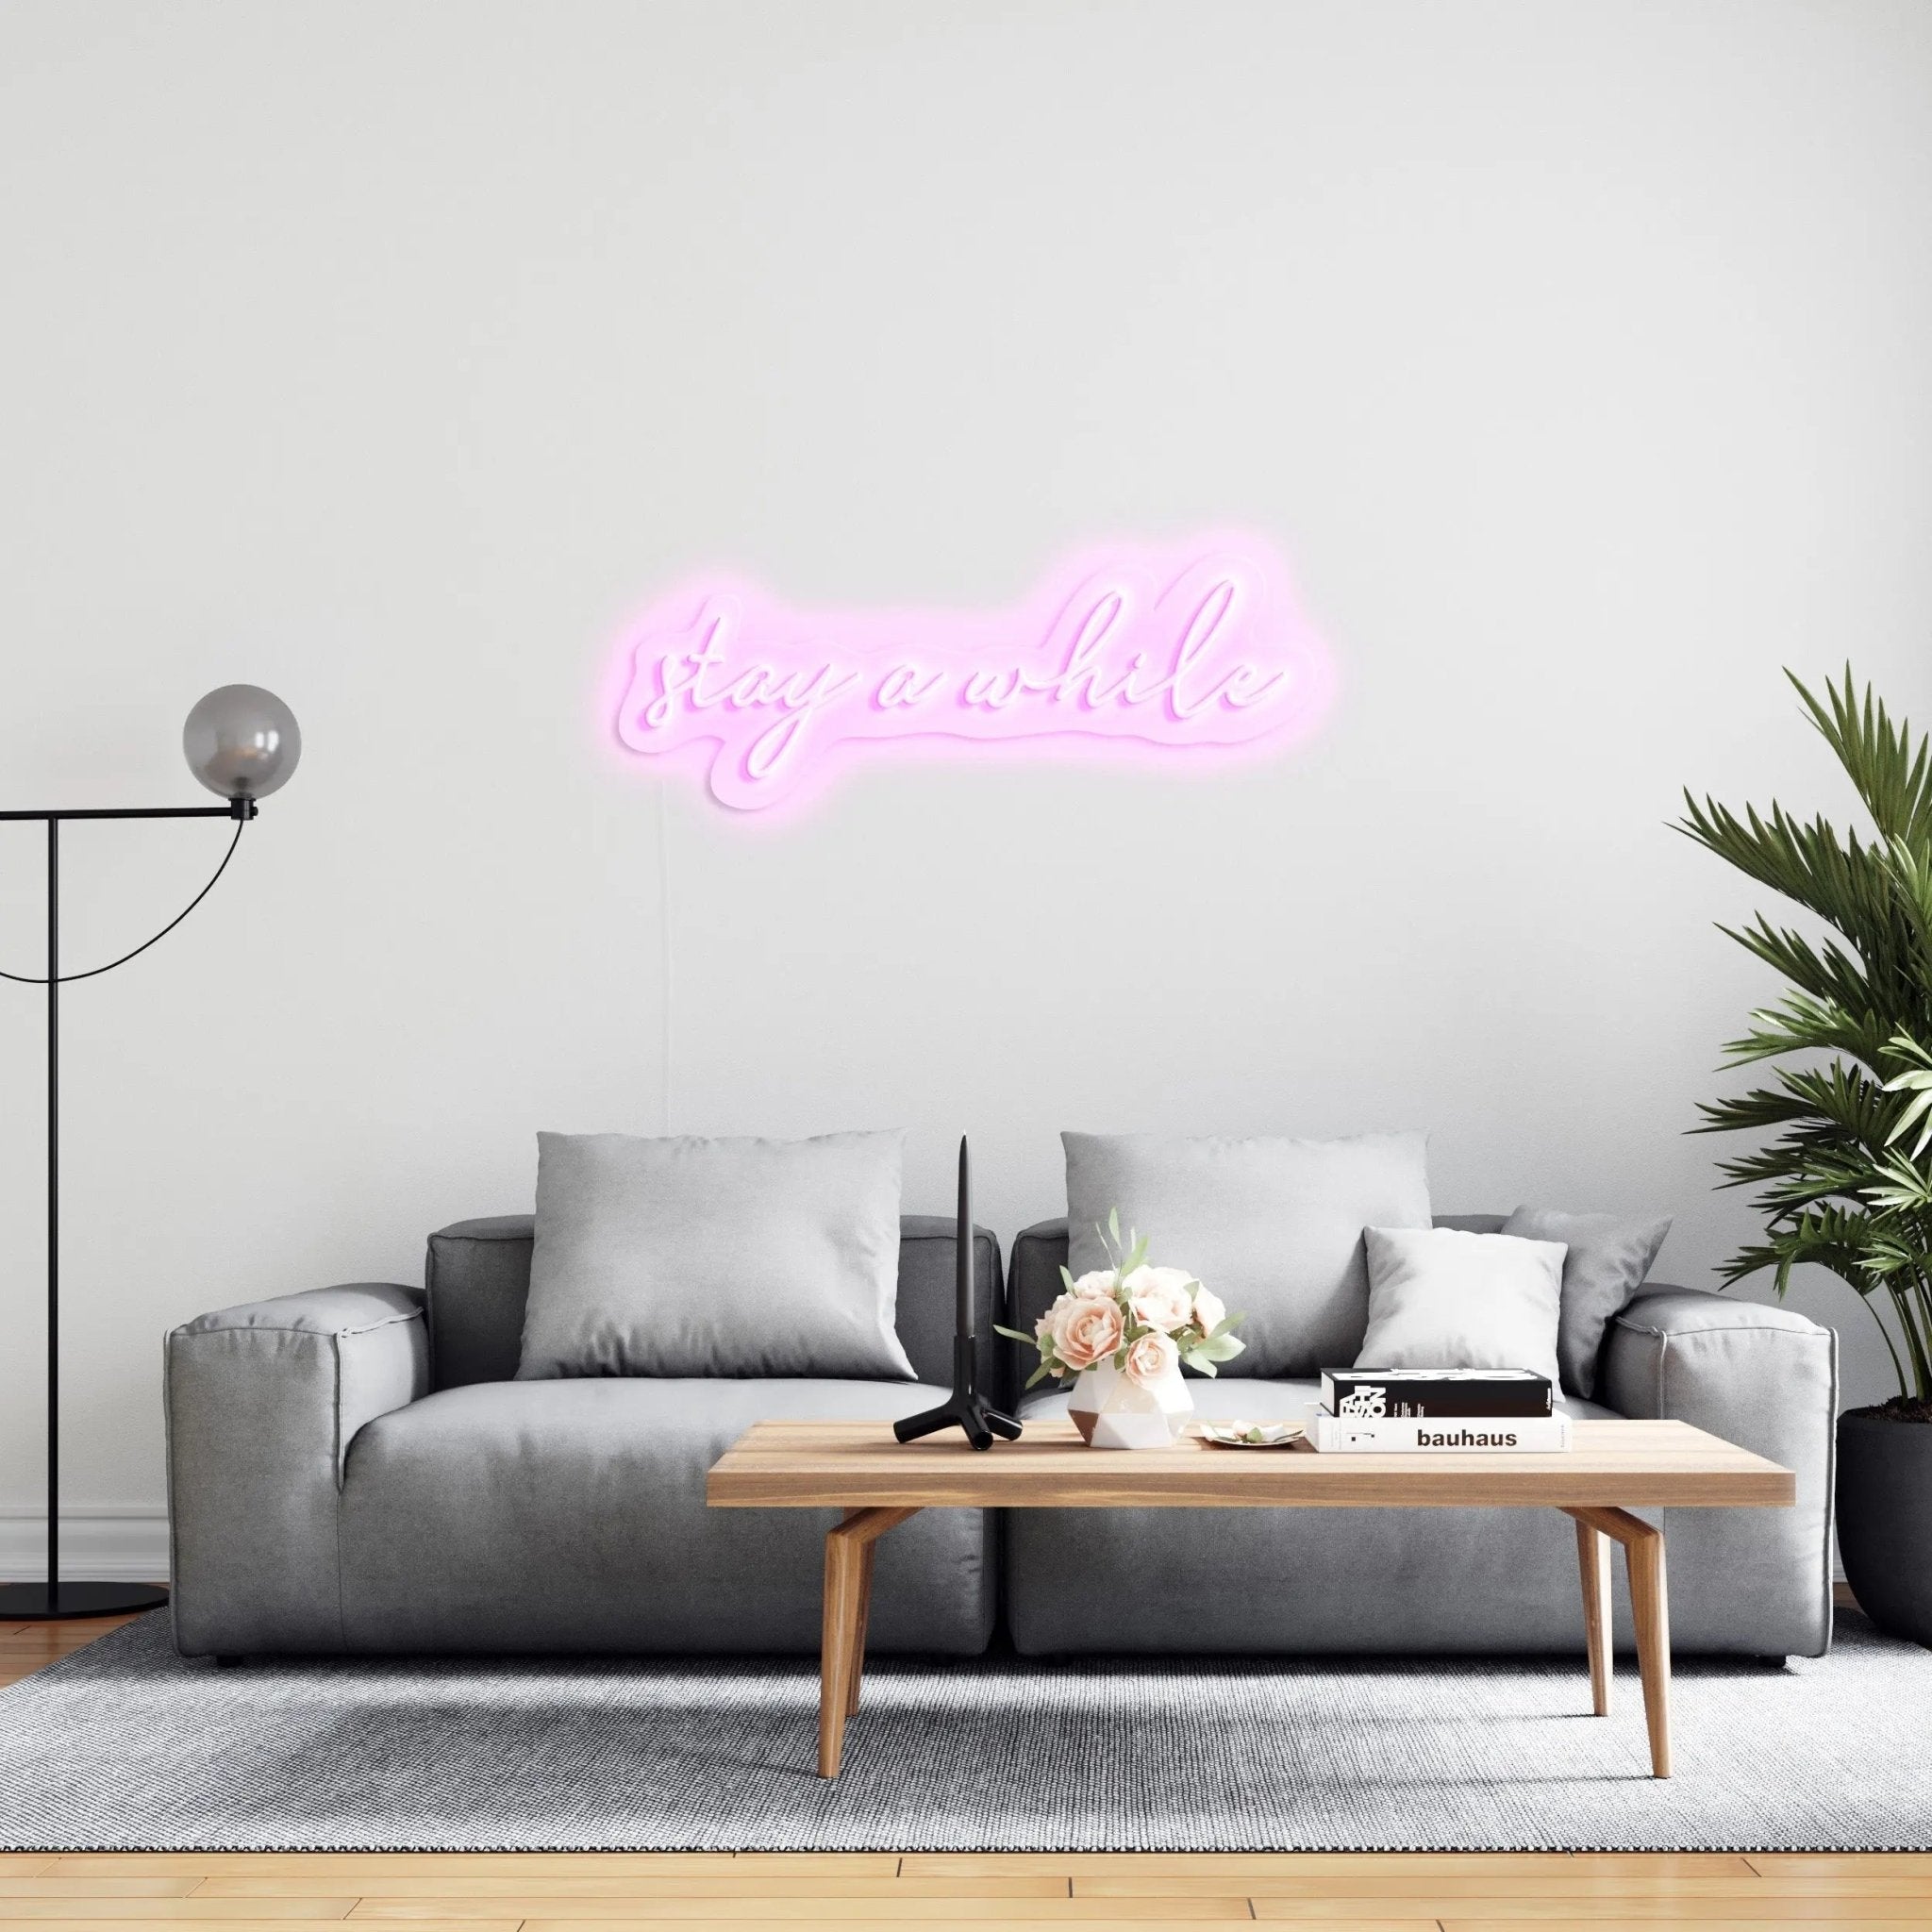 'stay a while' LED Neon Sign - neonaffair